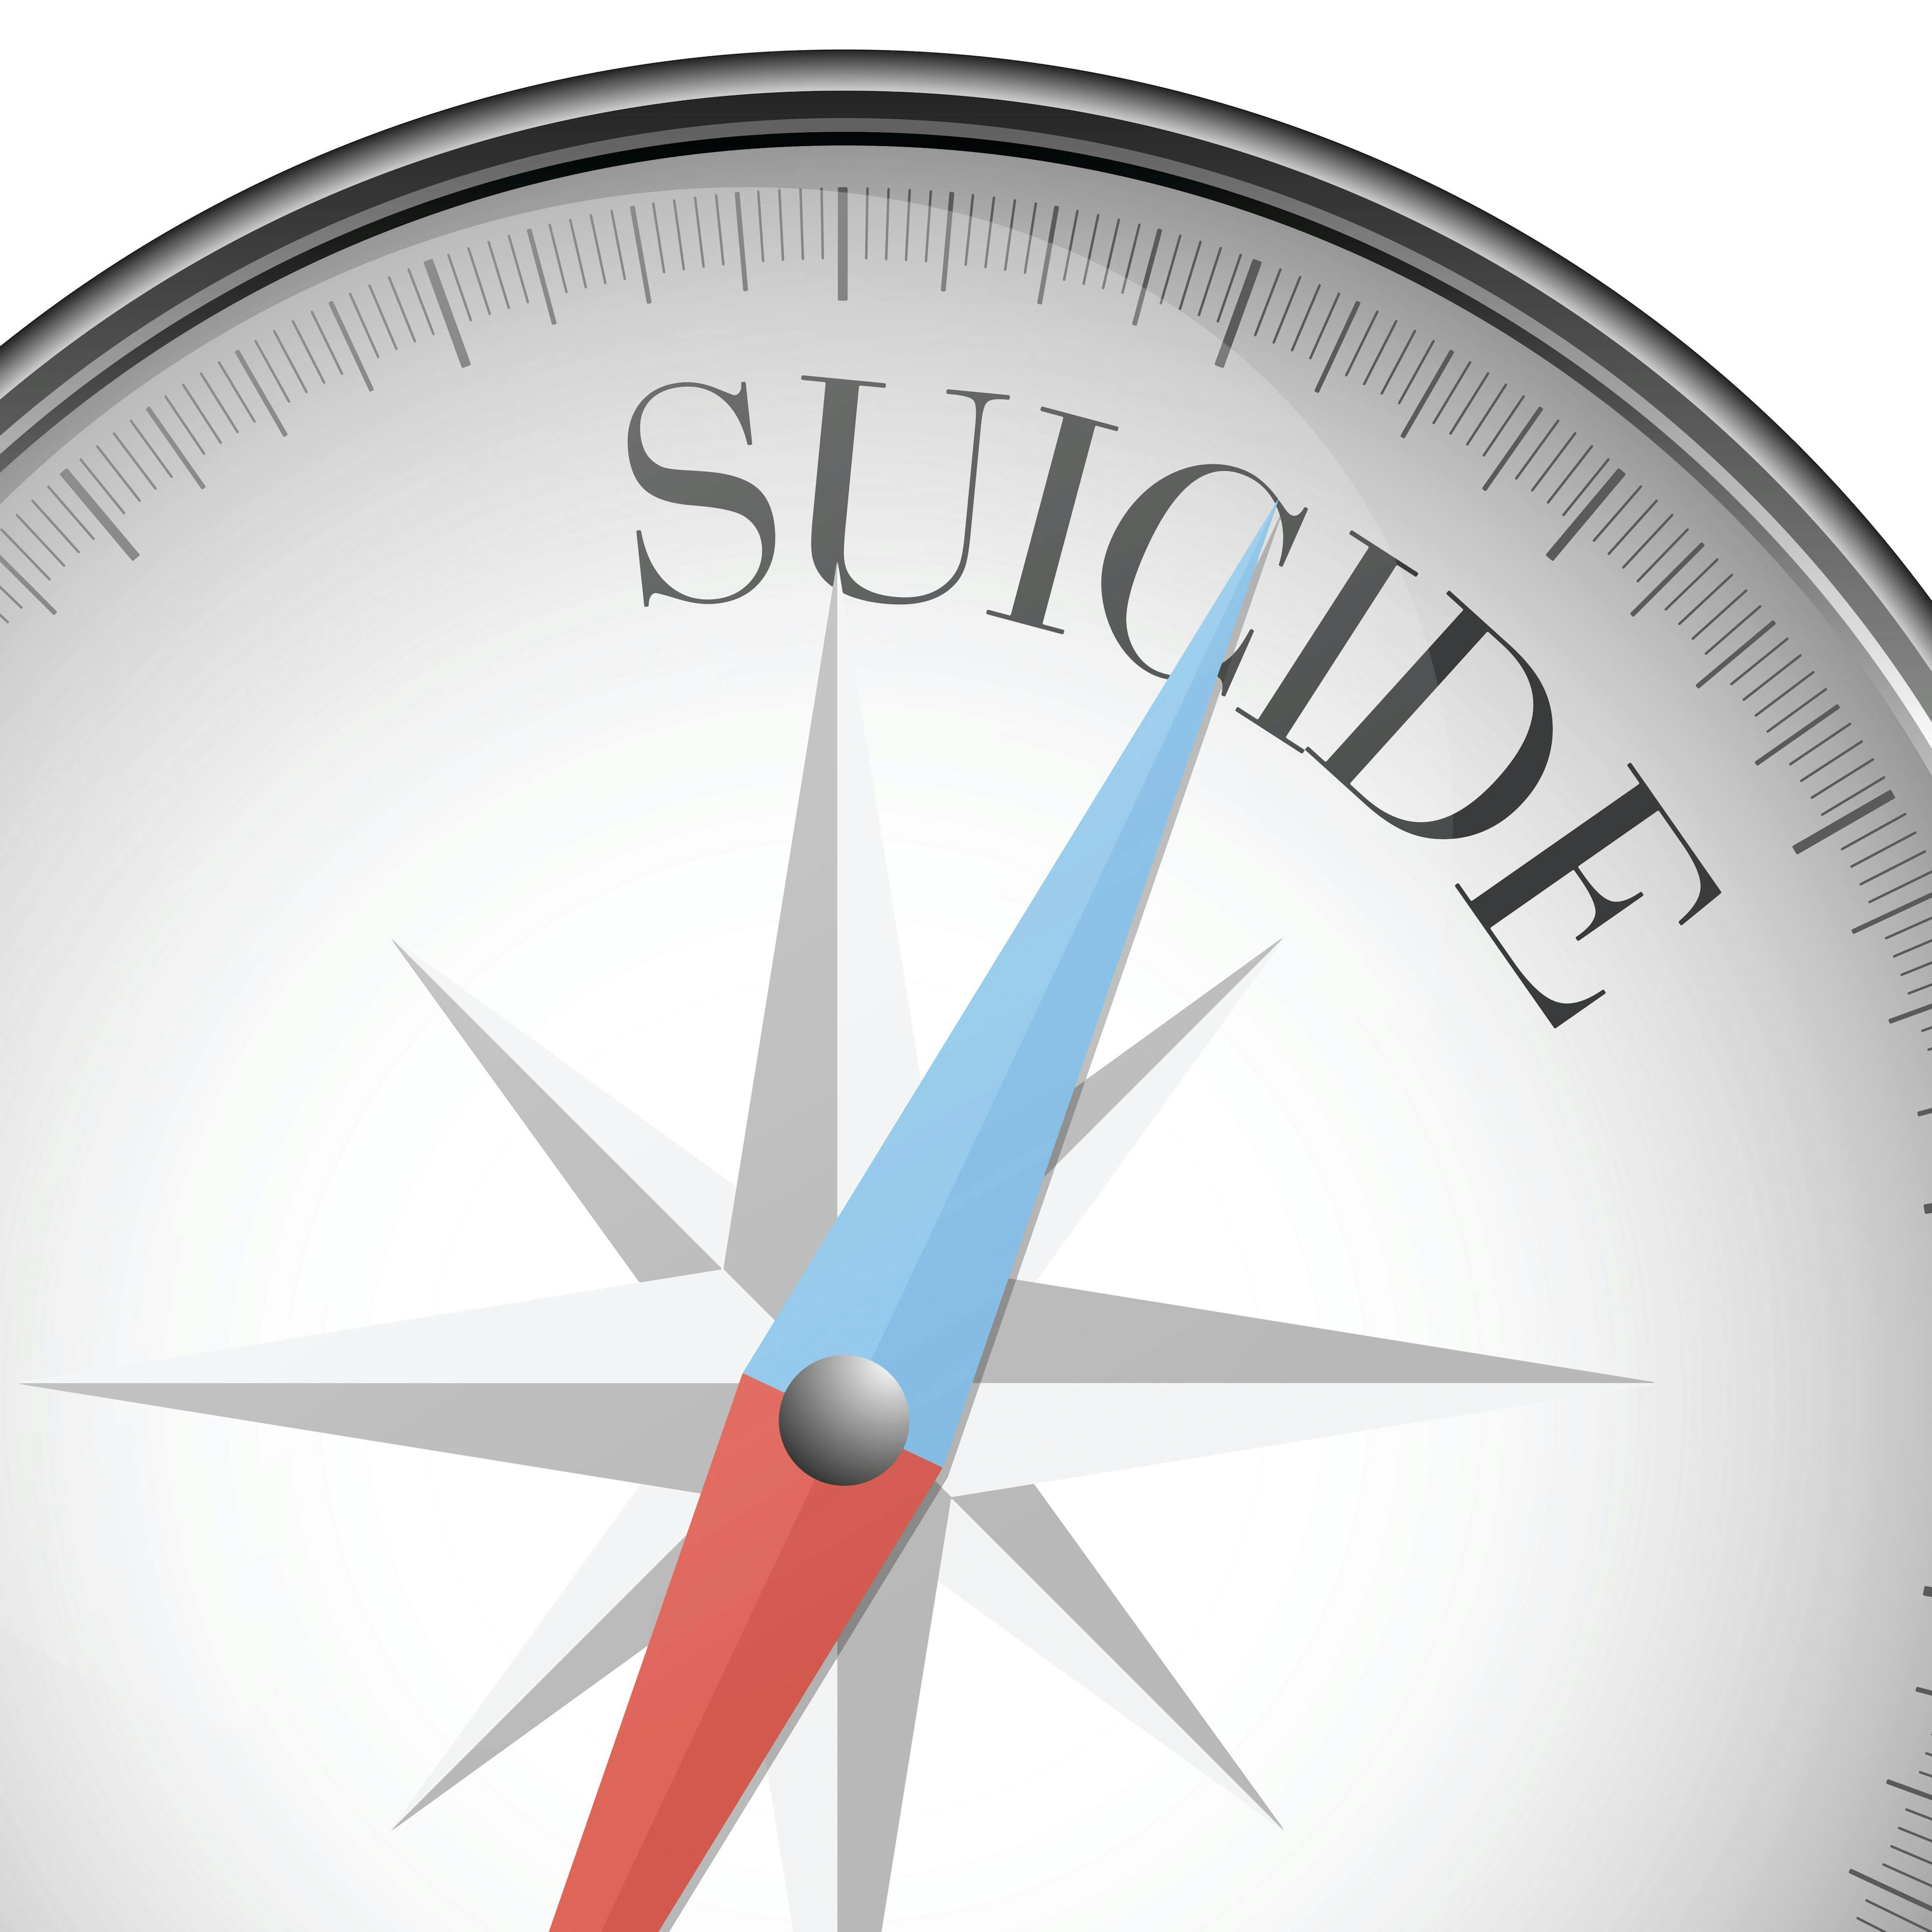 Suicide Prevention Month Tips and Insights